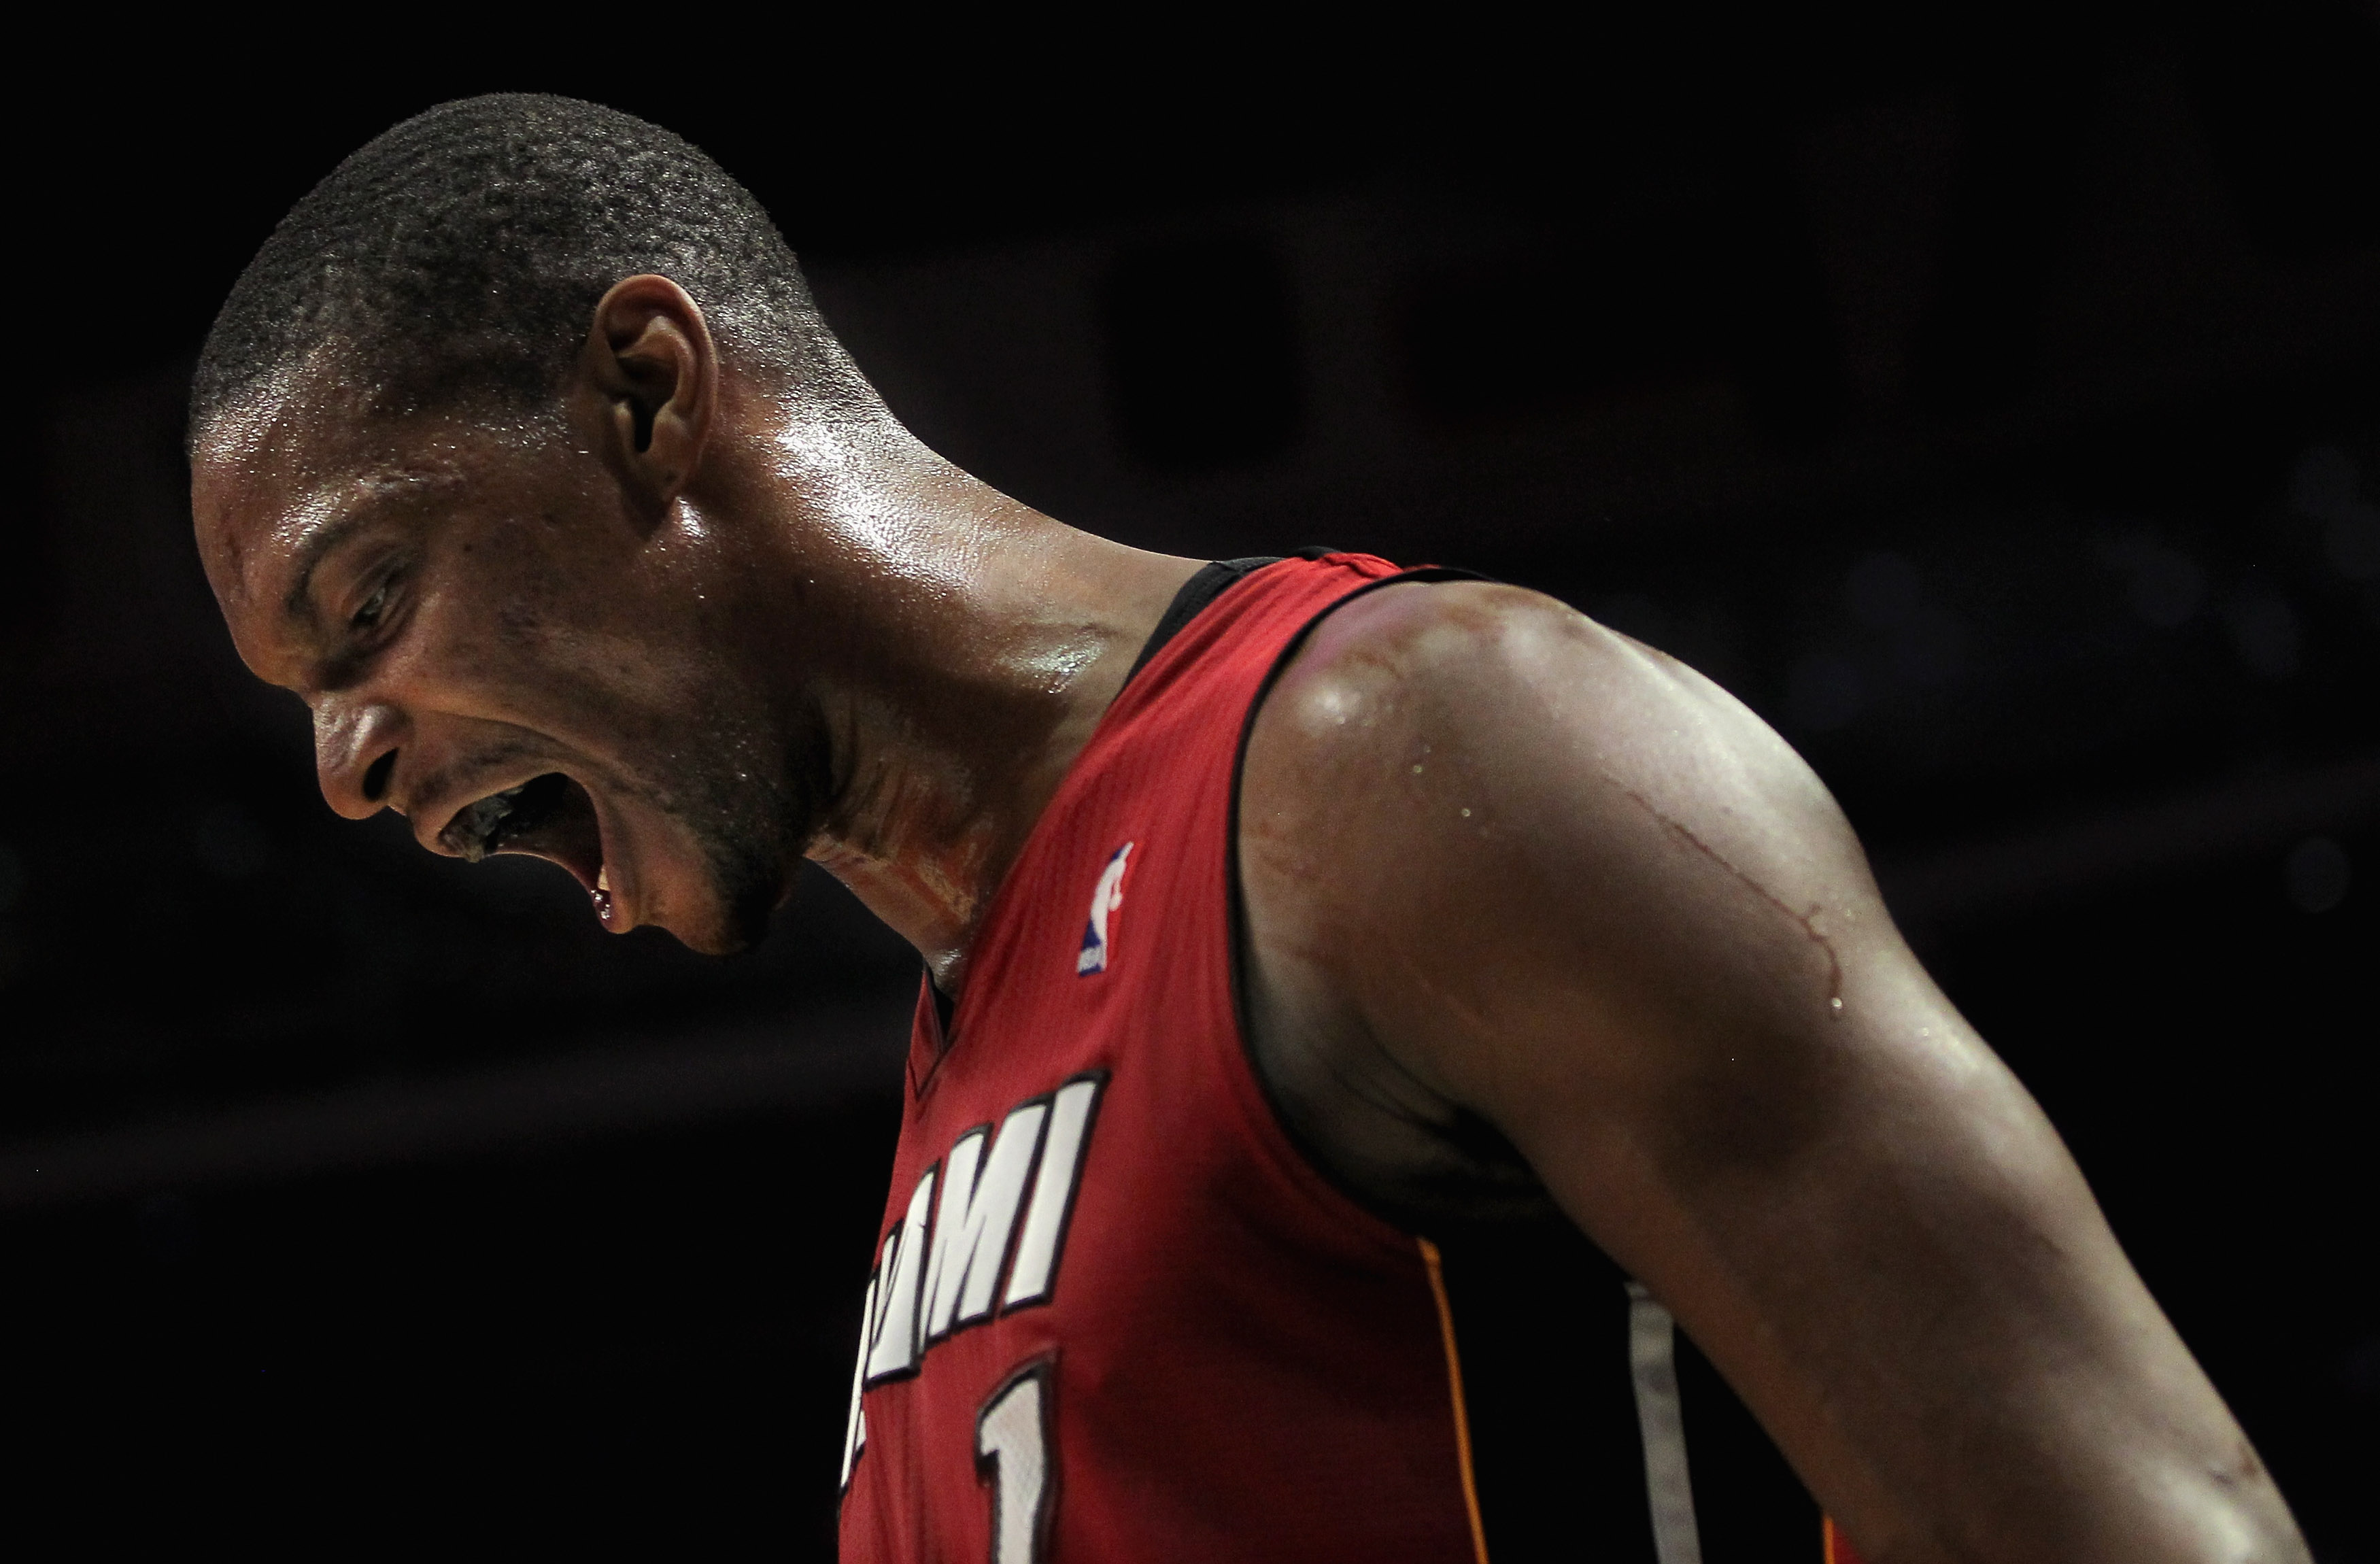 CHICAGO, IL - JANUARY 15:  Chris Bosh #1 of the Miami Heat reacts after a play against the Chicago Bulls at the United Center on January 15, 2011 in Chicago, Illinois. The Bulls defeated the Heat 99-96. NOTE TO USER: User expressly acknowledges and agrees